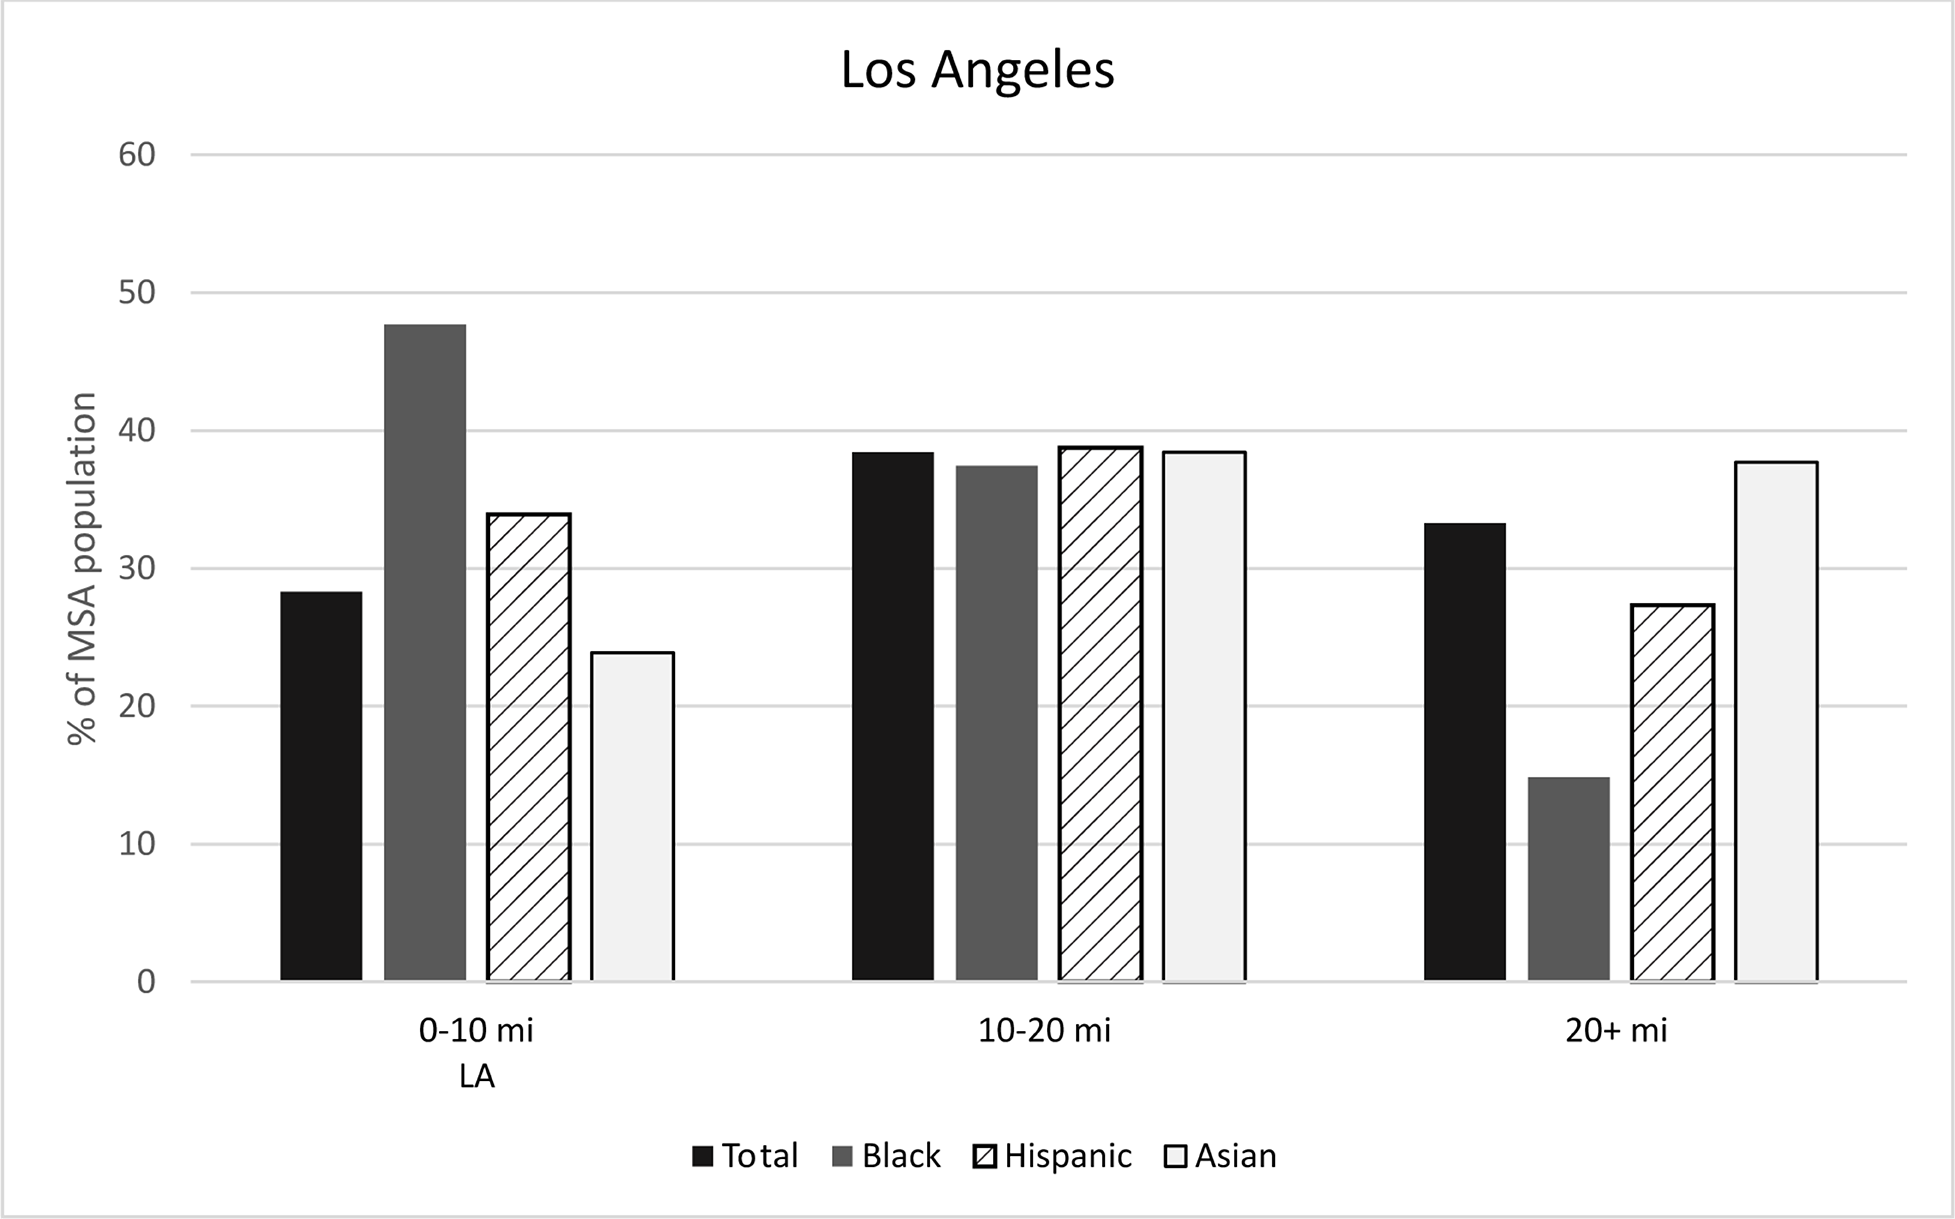 Figure 5: Racial/ethnic concentration by distance to CBD, Los Angeles. See accessible link for data.